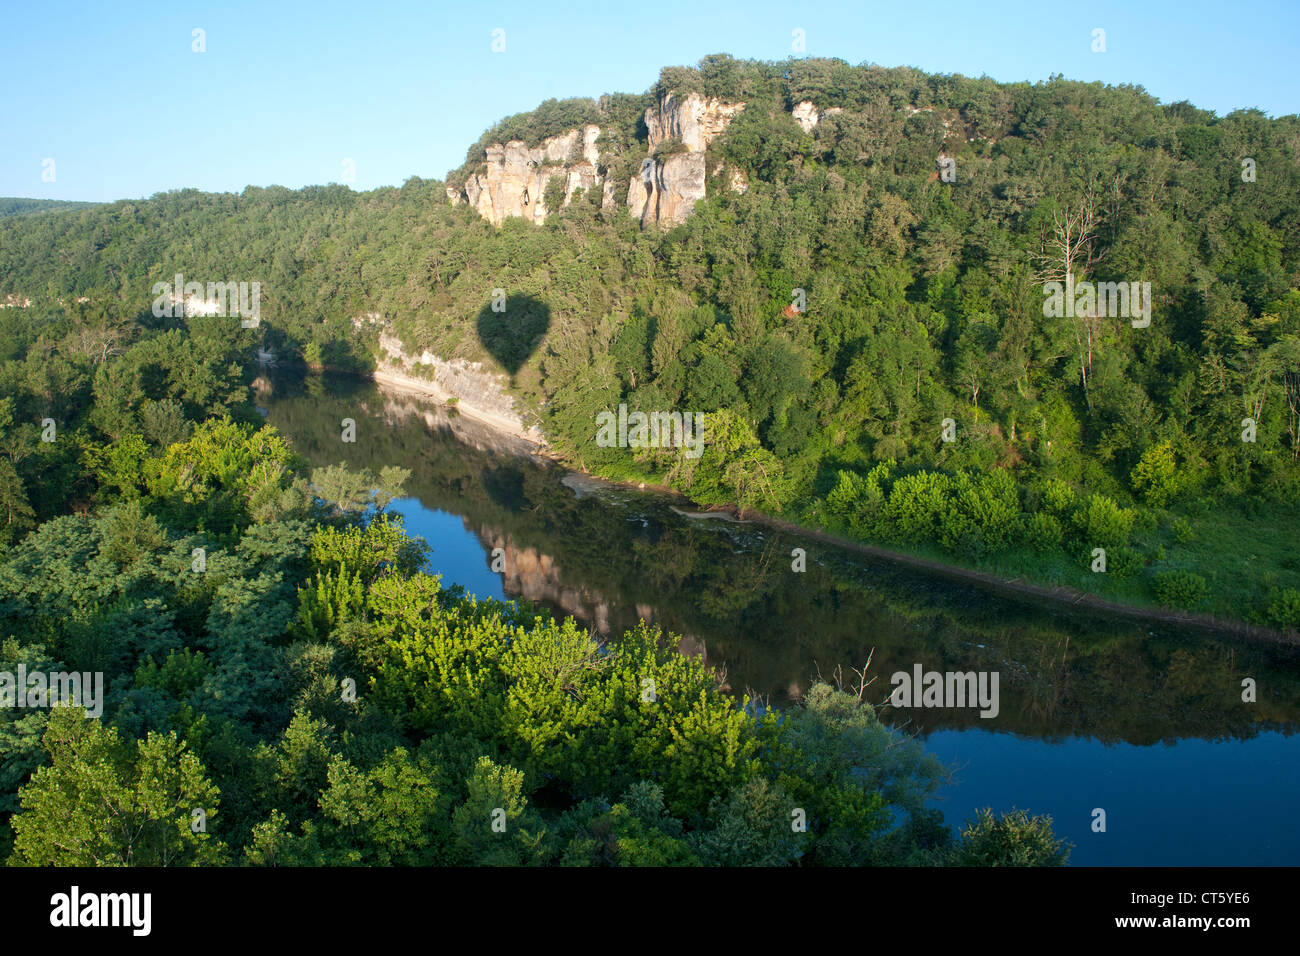 Aerial view of the Dordogne river and surrounding countryside near Sarlat in the Dordogne-Perigord region of south west France. Stock Photo